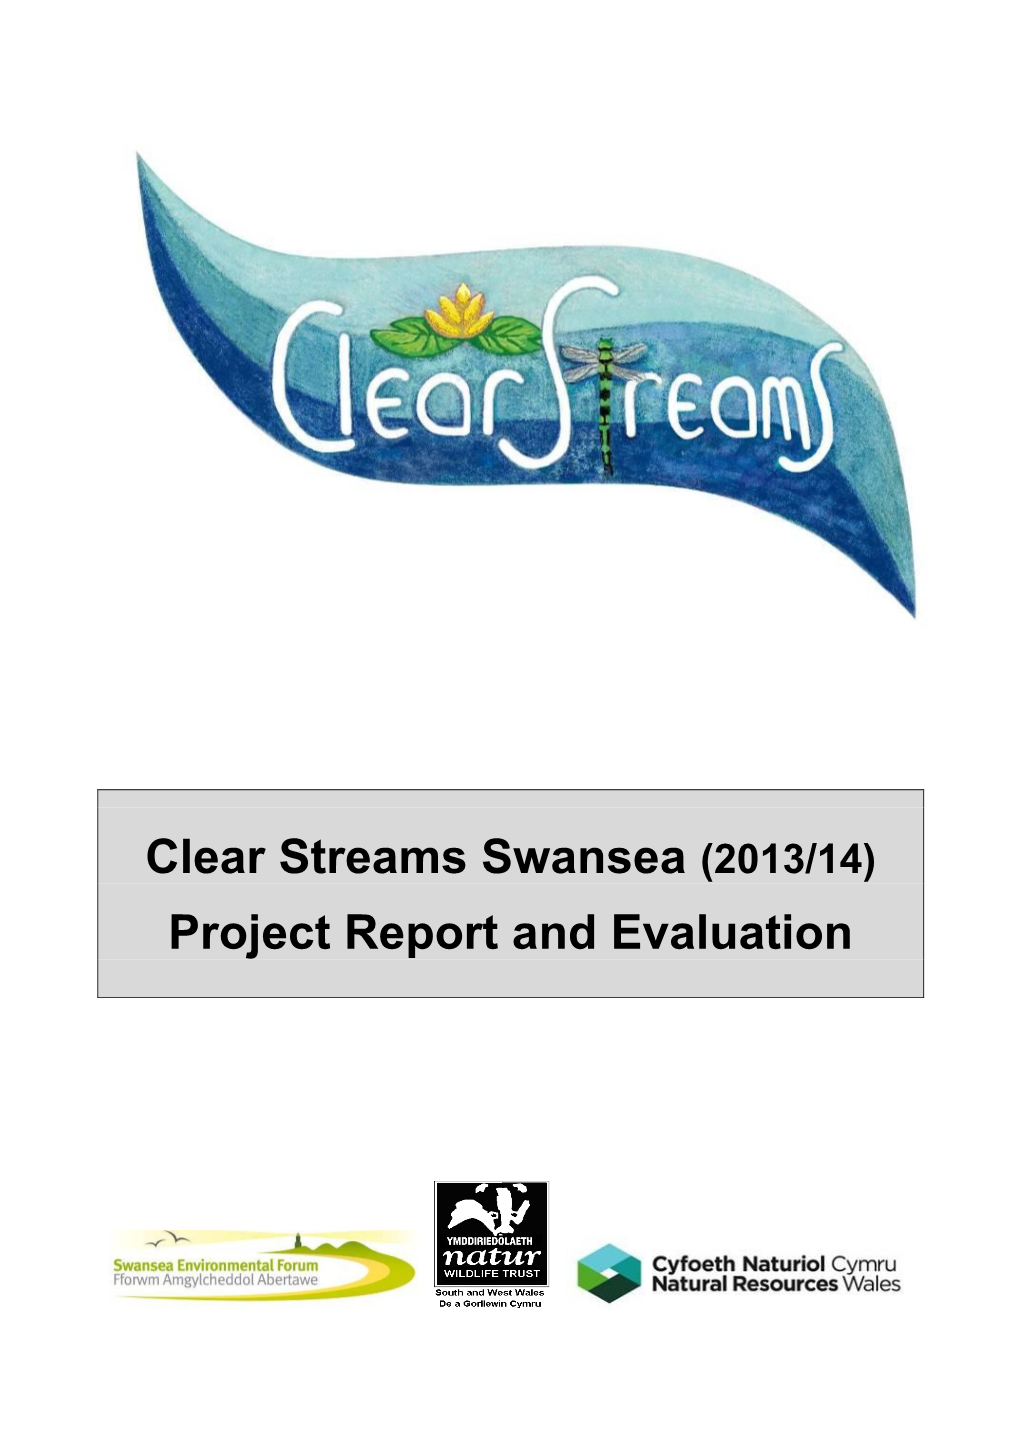 Clear Streams Swansea (2013/14) Project Report and Evaluation